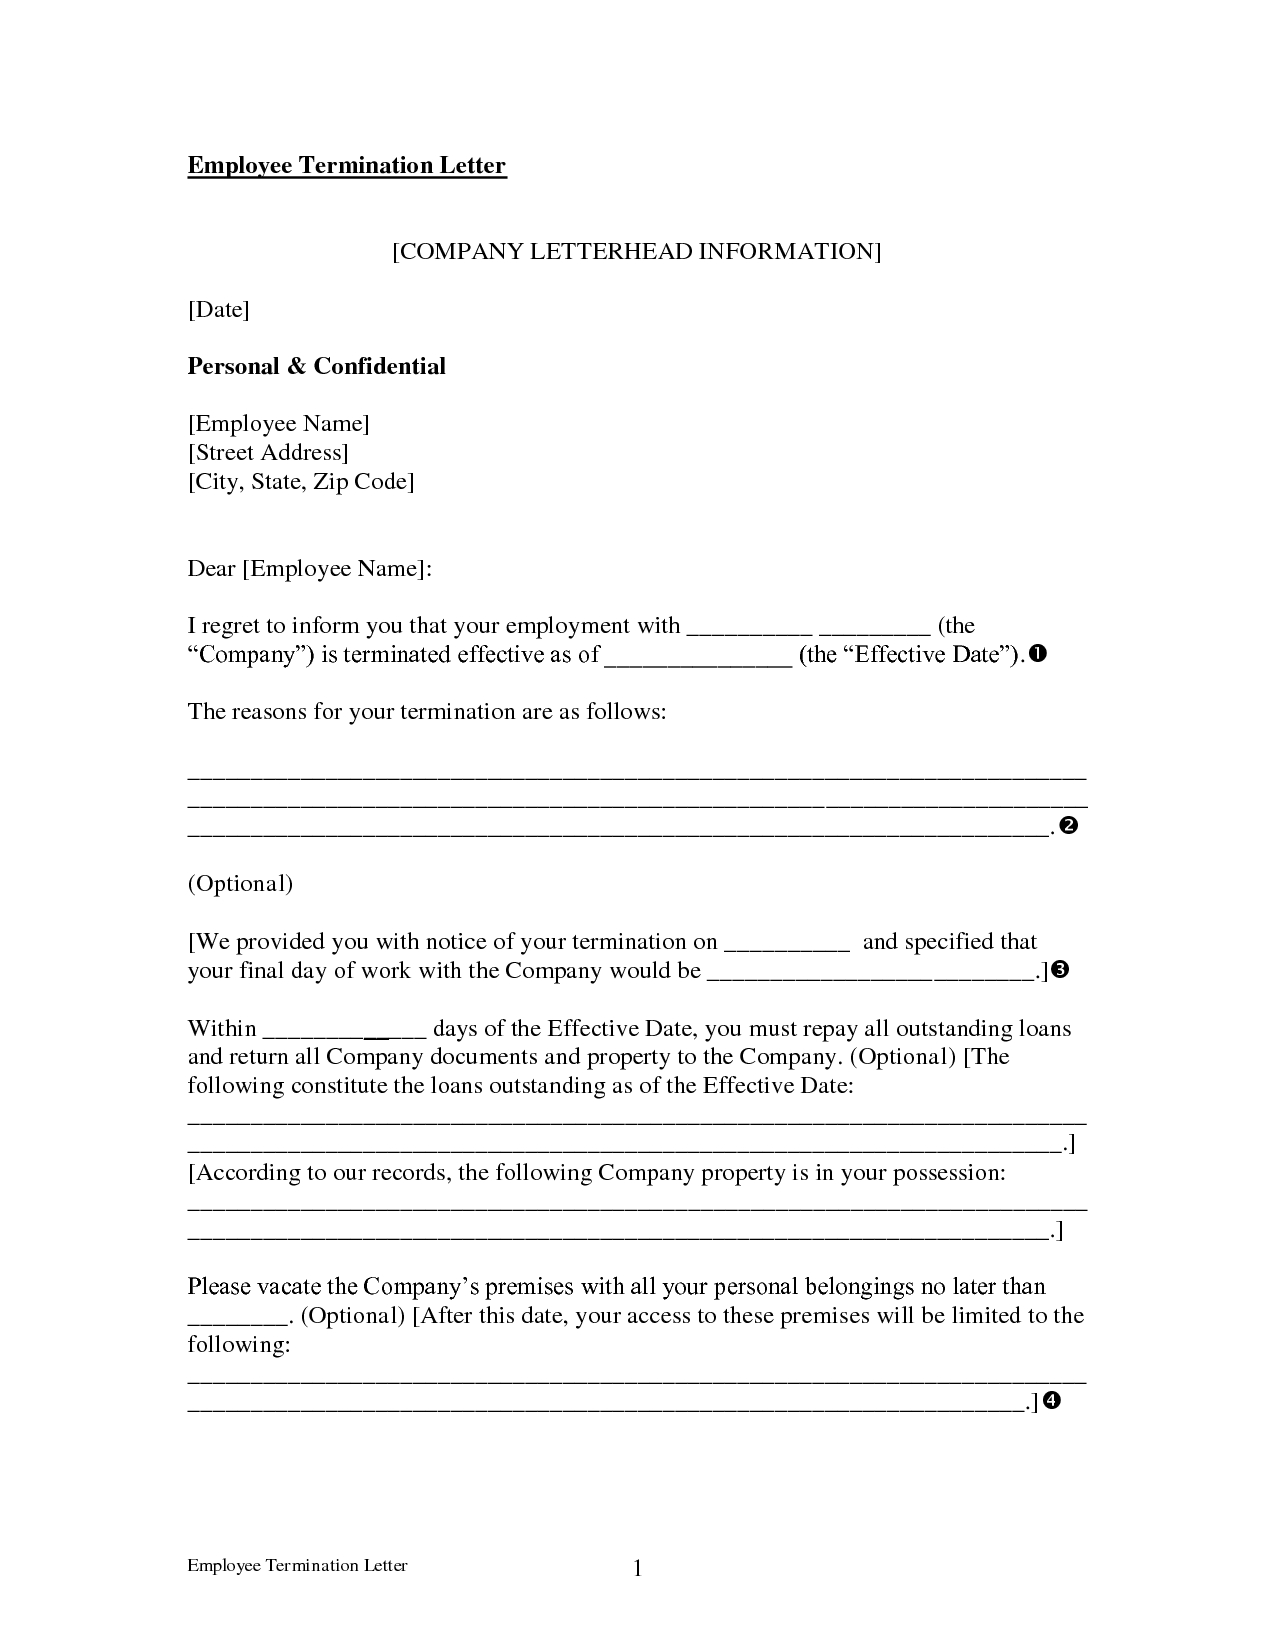 Free Contract Termination Letter Template - Example Termination Letter to Employee Samples